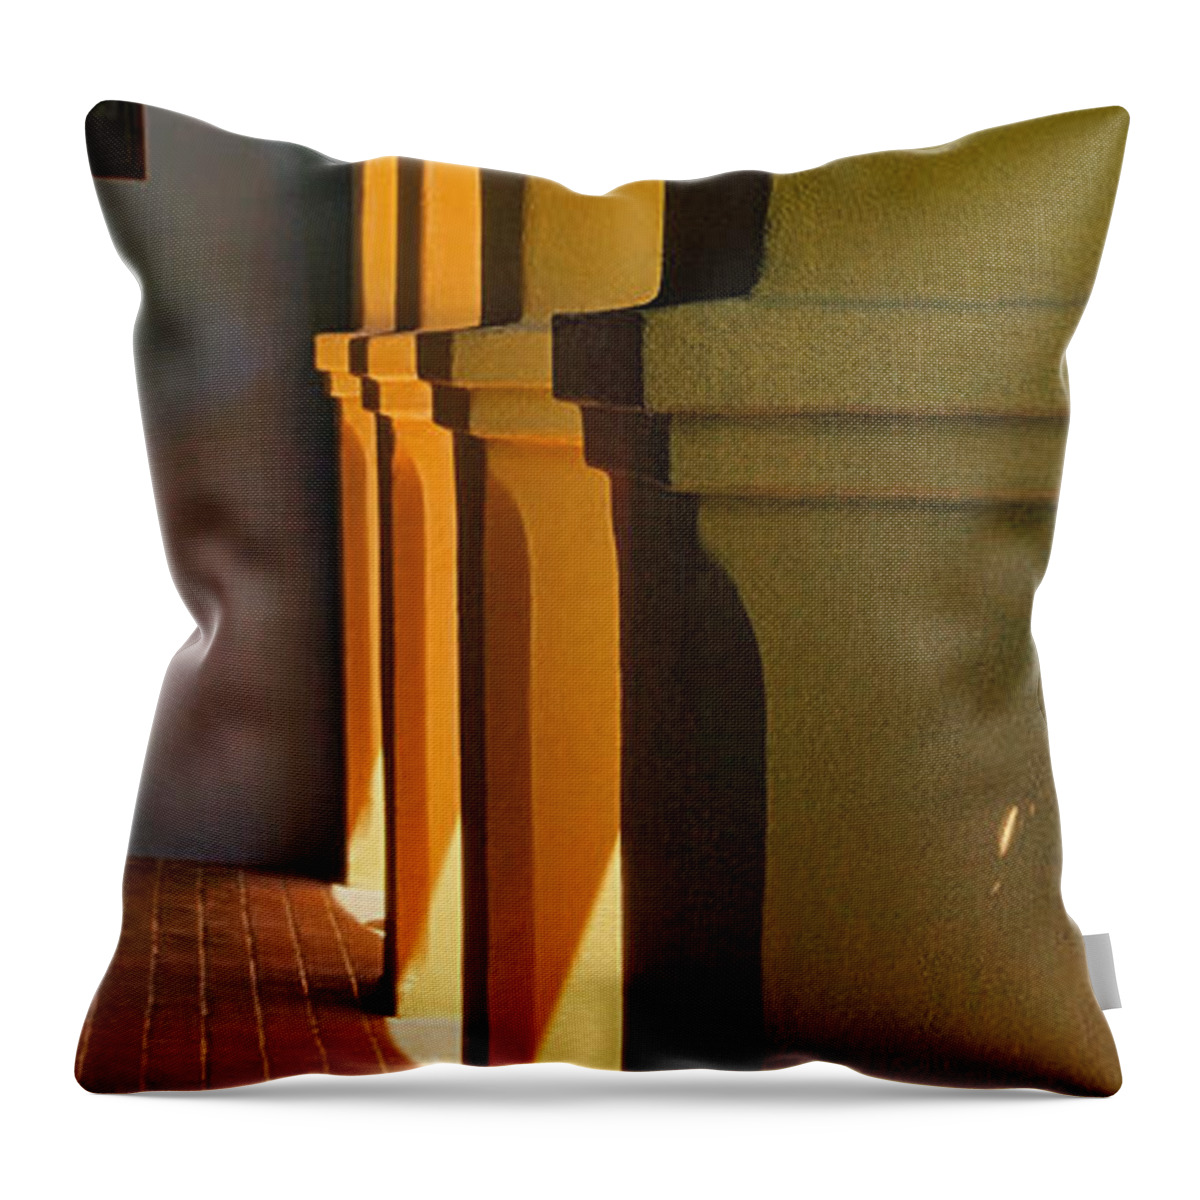 Tumacacori Throw Pillow featuring the photograph Mission Arches Pano by Theo O'Connor